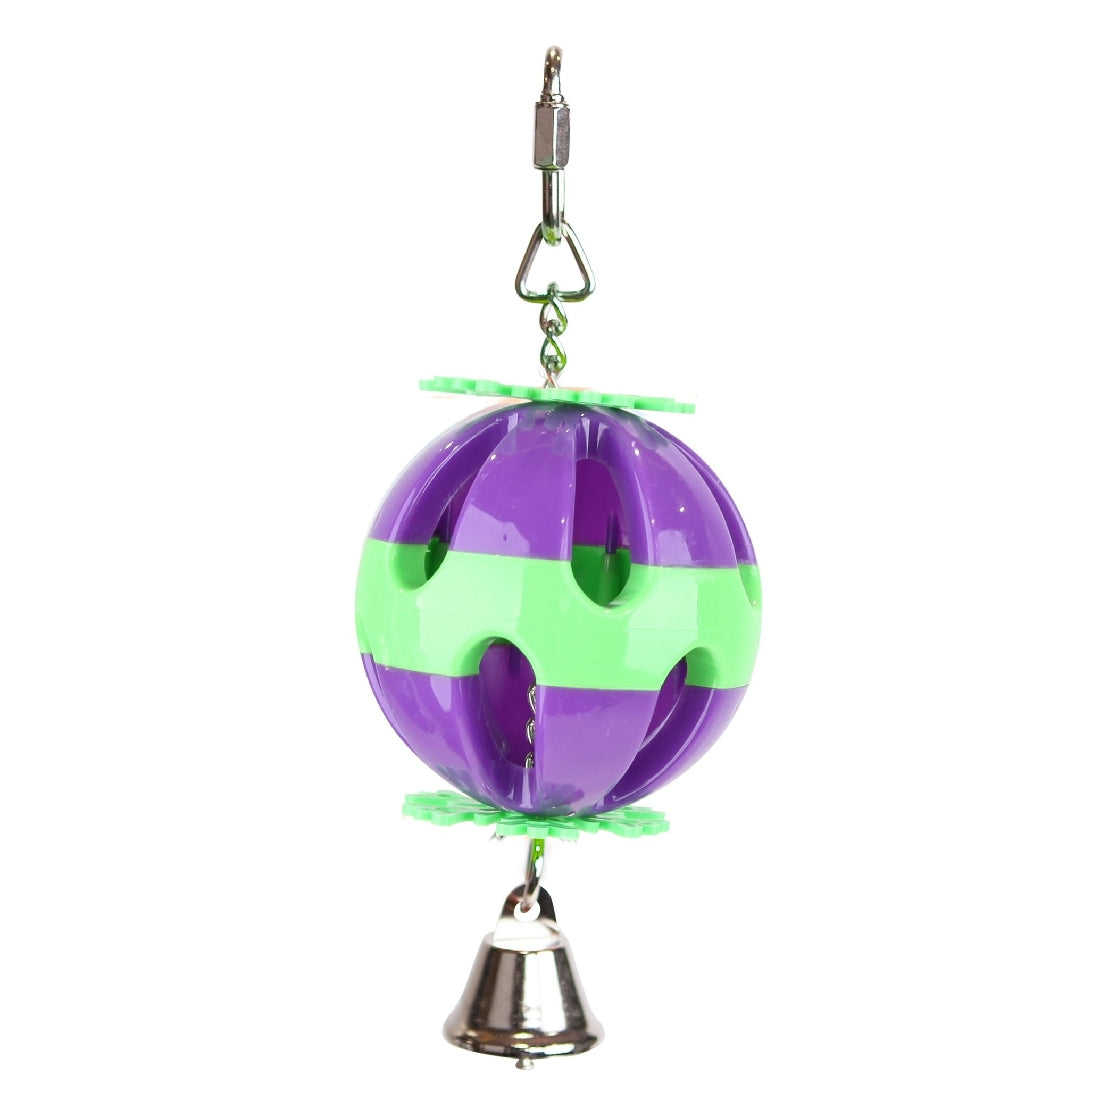 Purple and green spherical bird toy with bell on white background.